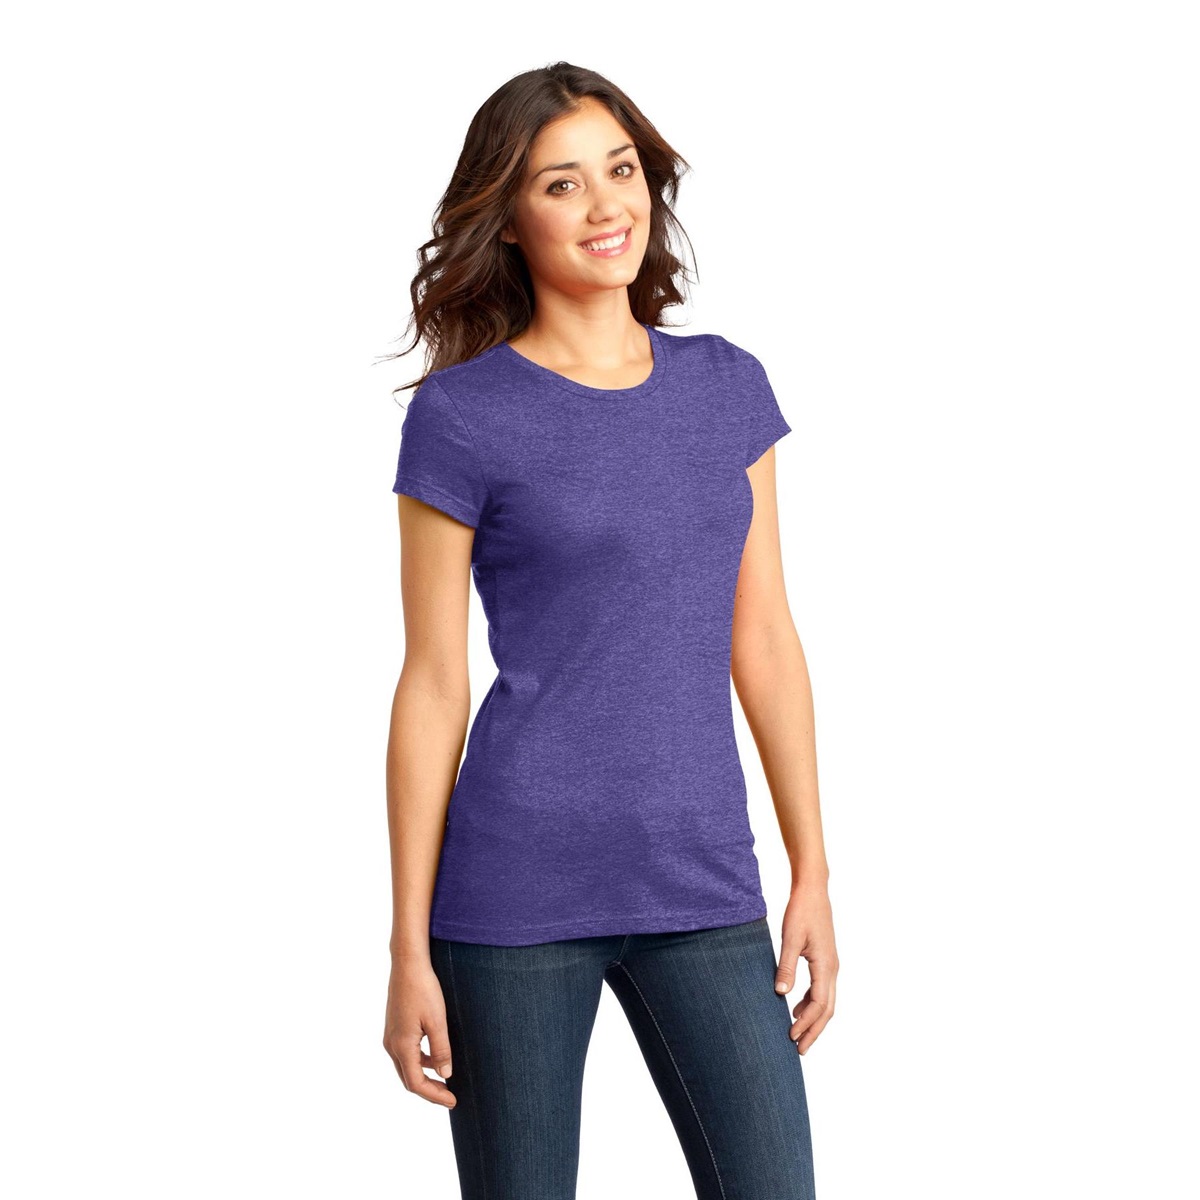 District DT6001 Juniors Very Important Tee - Heathered Purple ...